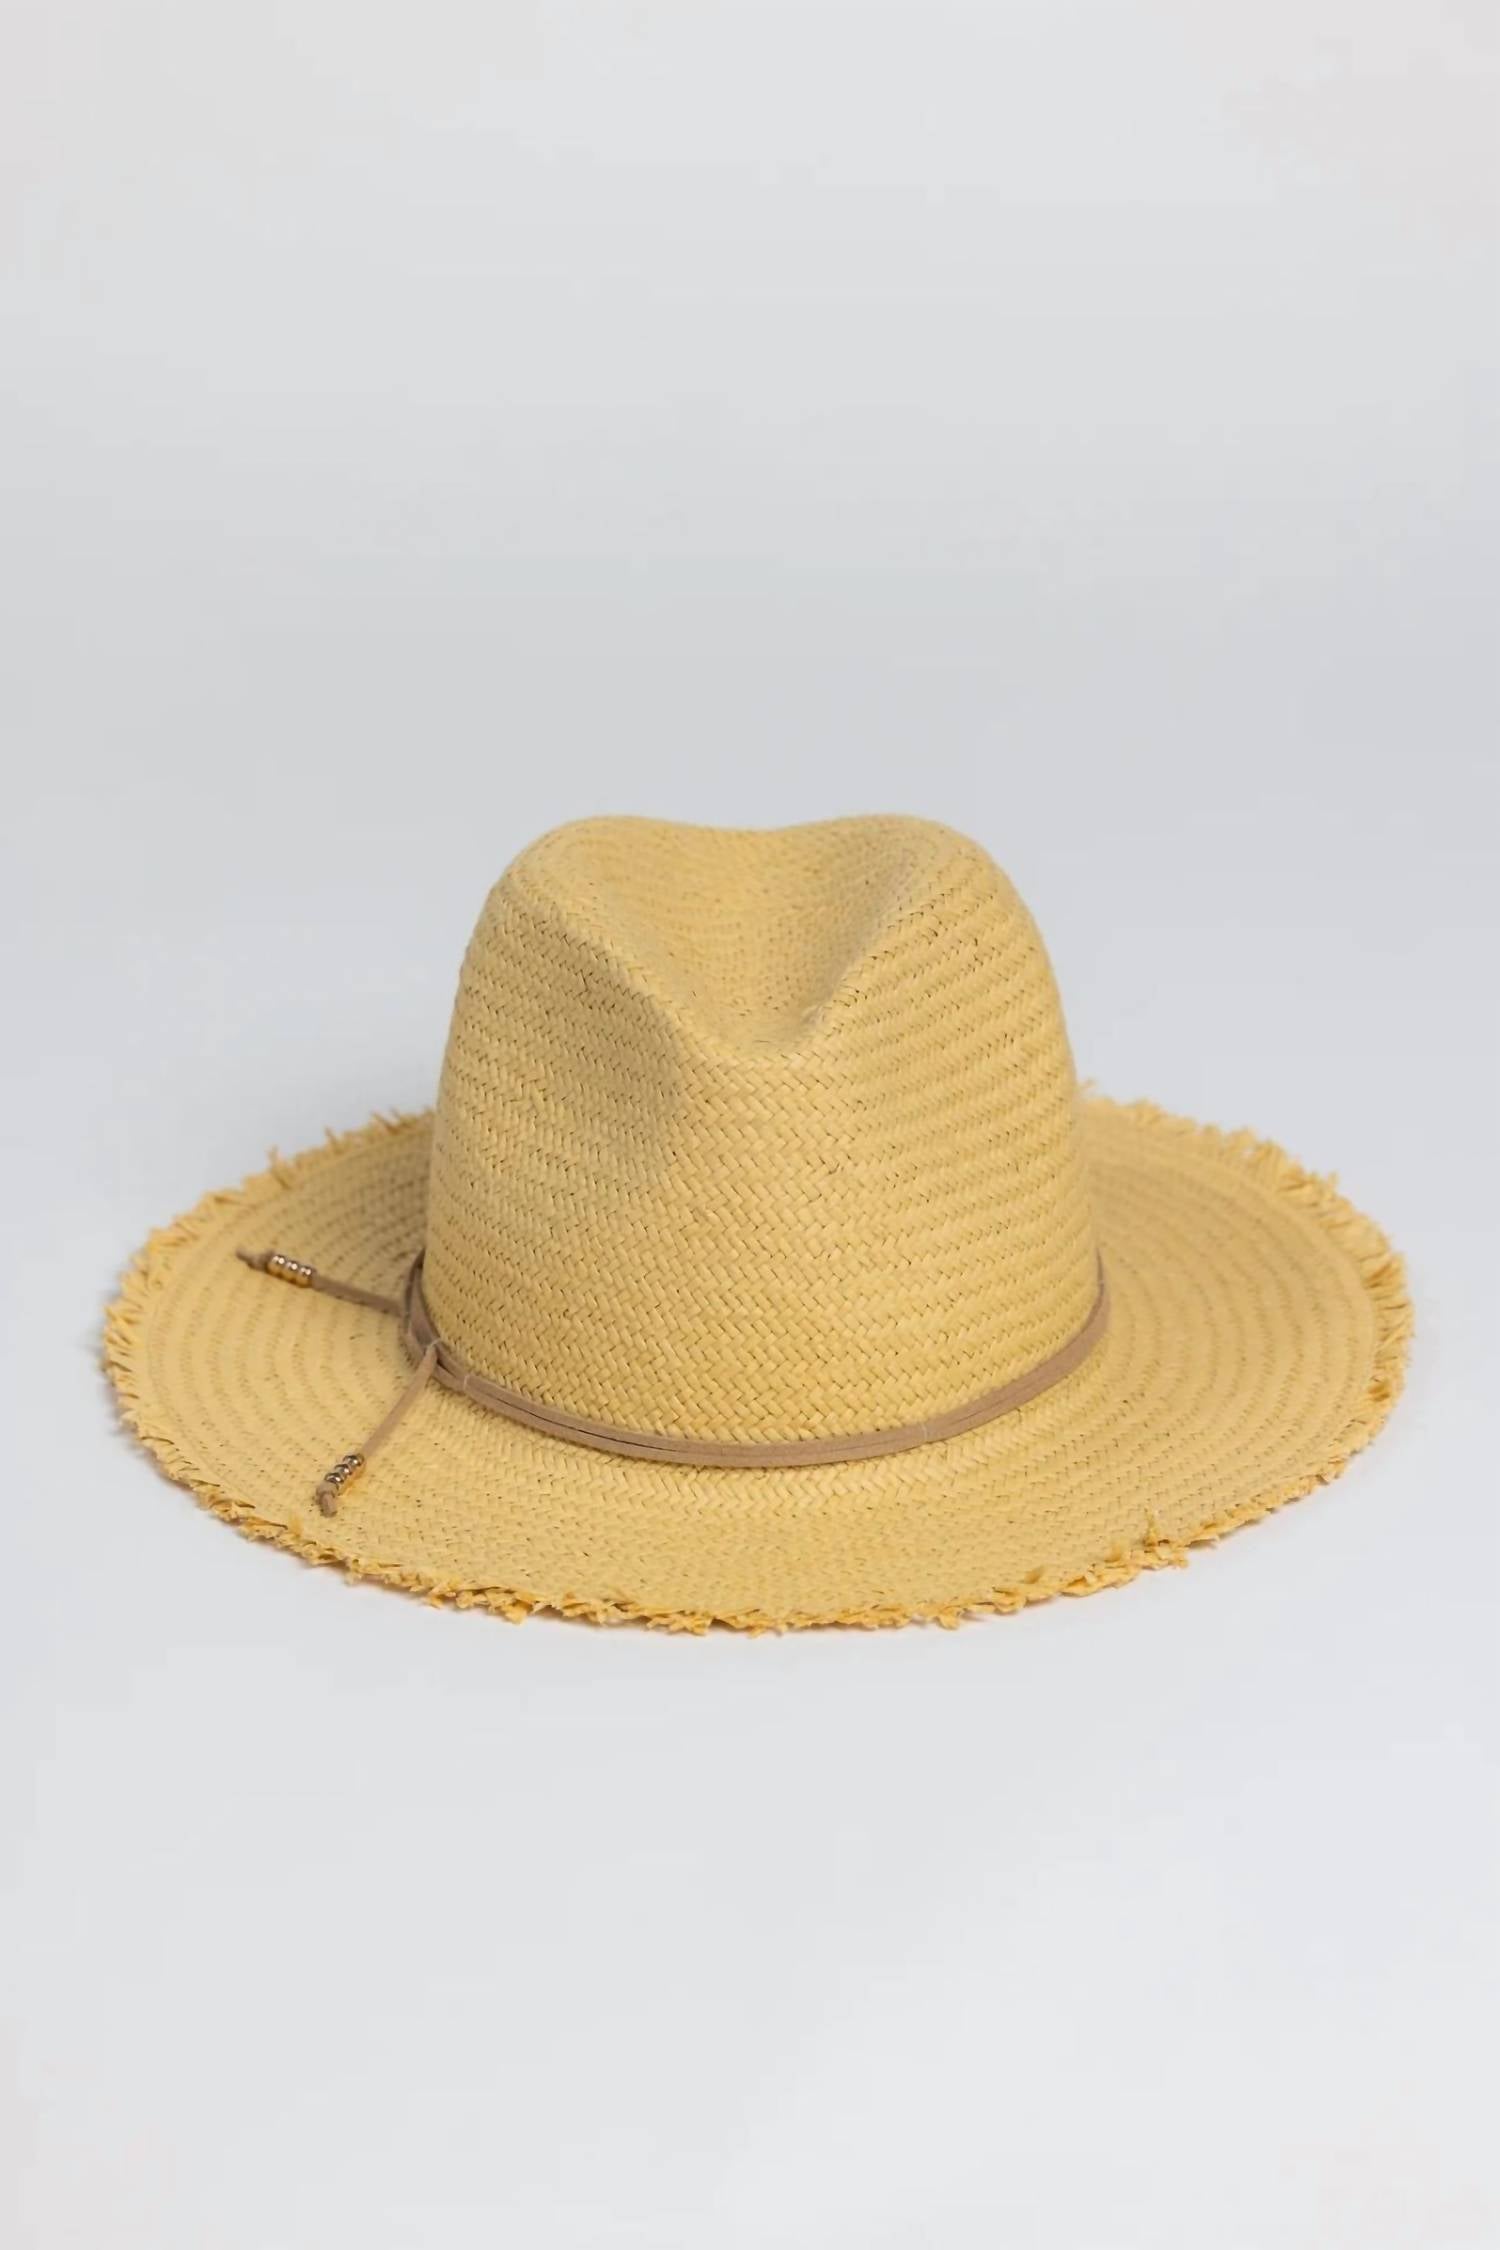 HAT ATTACK Classic Travel Hat W/ Fringe in Toast